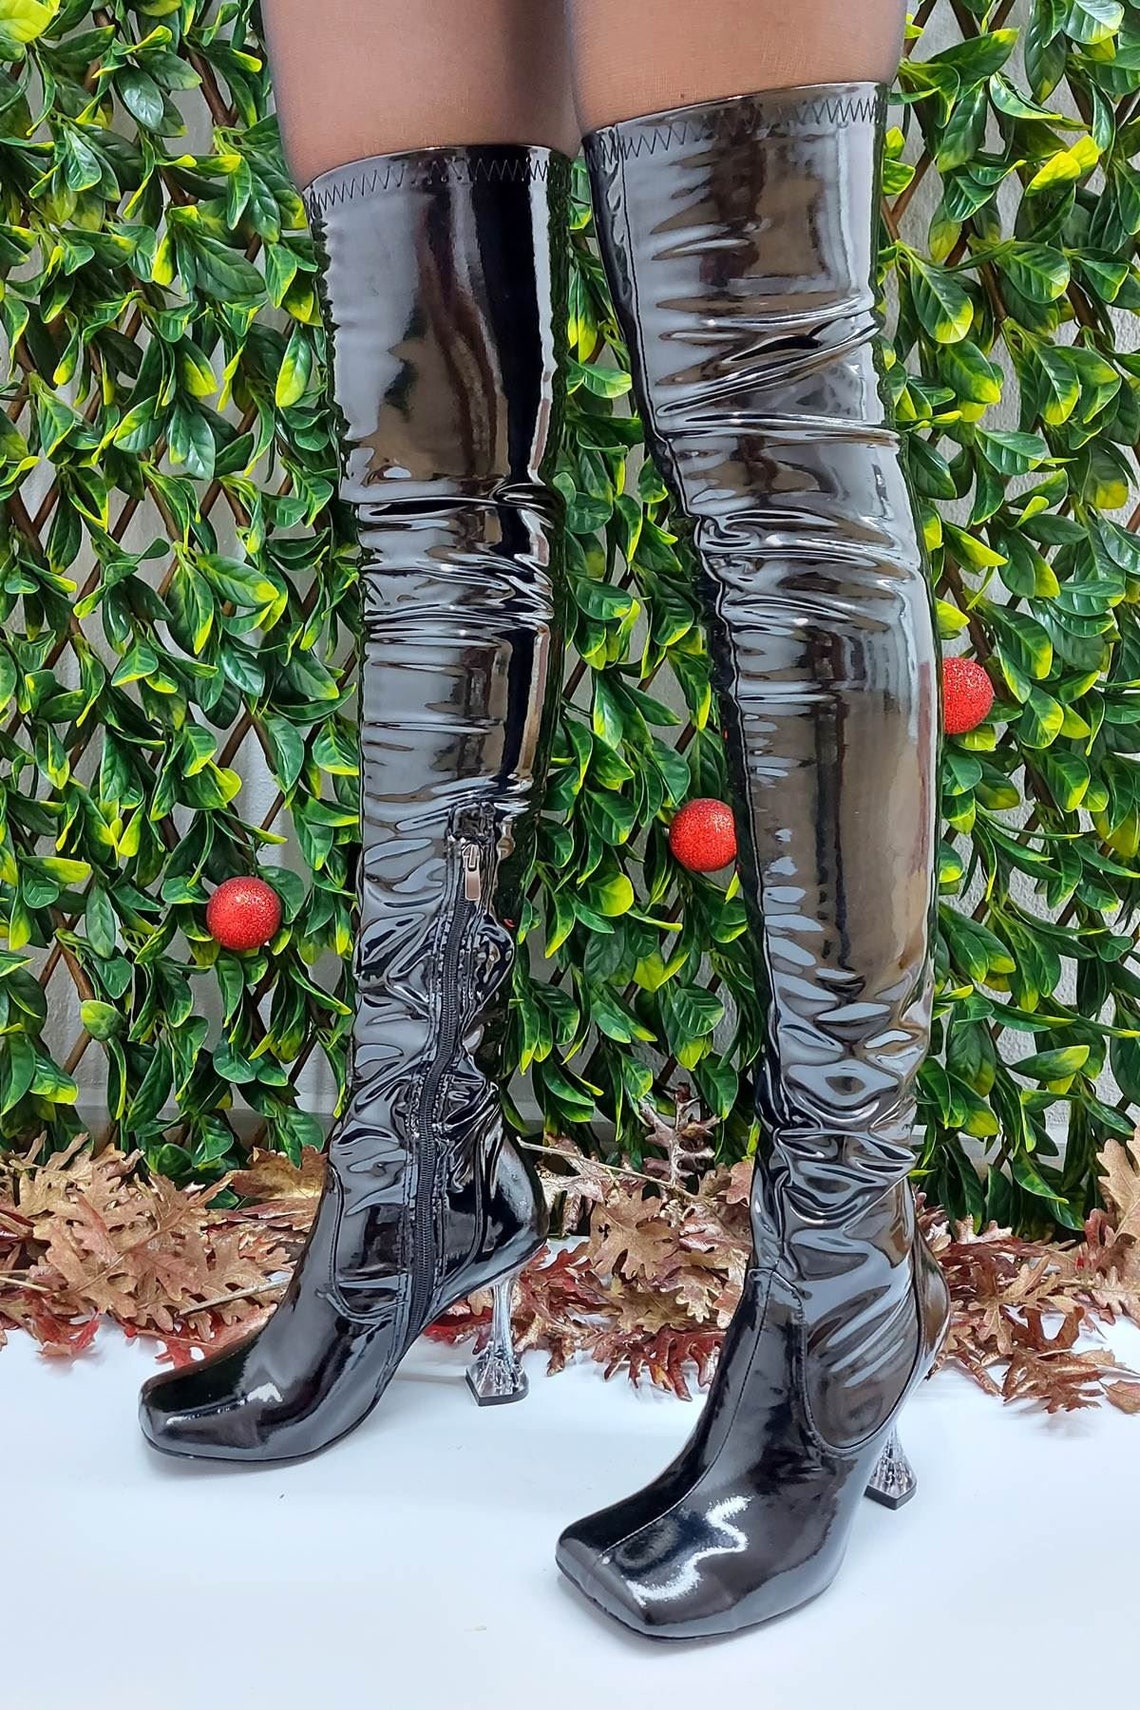 BLACK THIGH HIGH Boots Over the Knee Boots With Side Zipper - Etsy